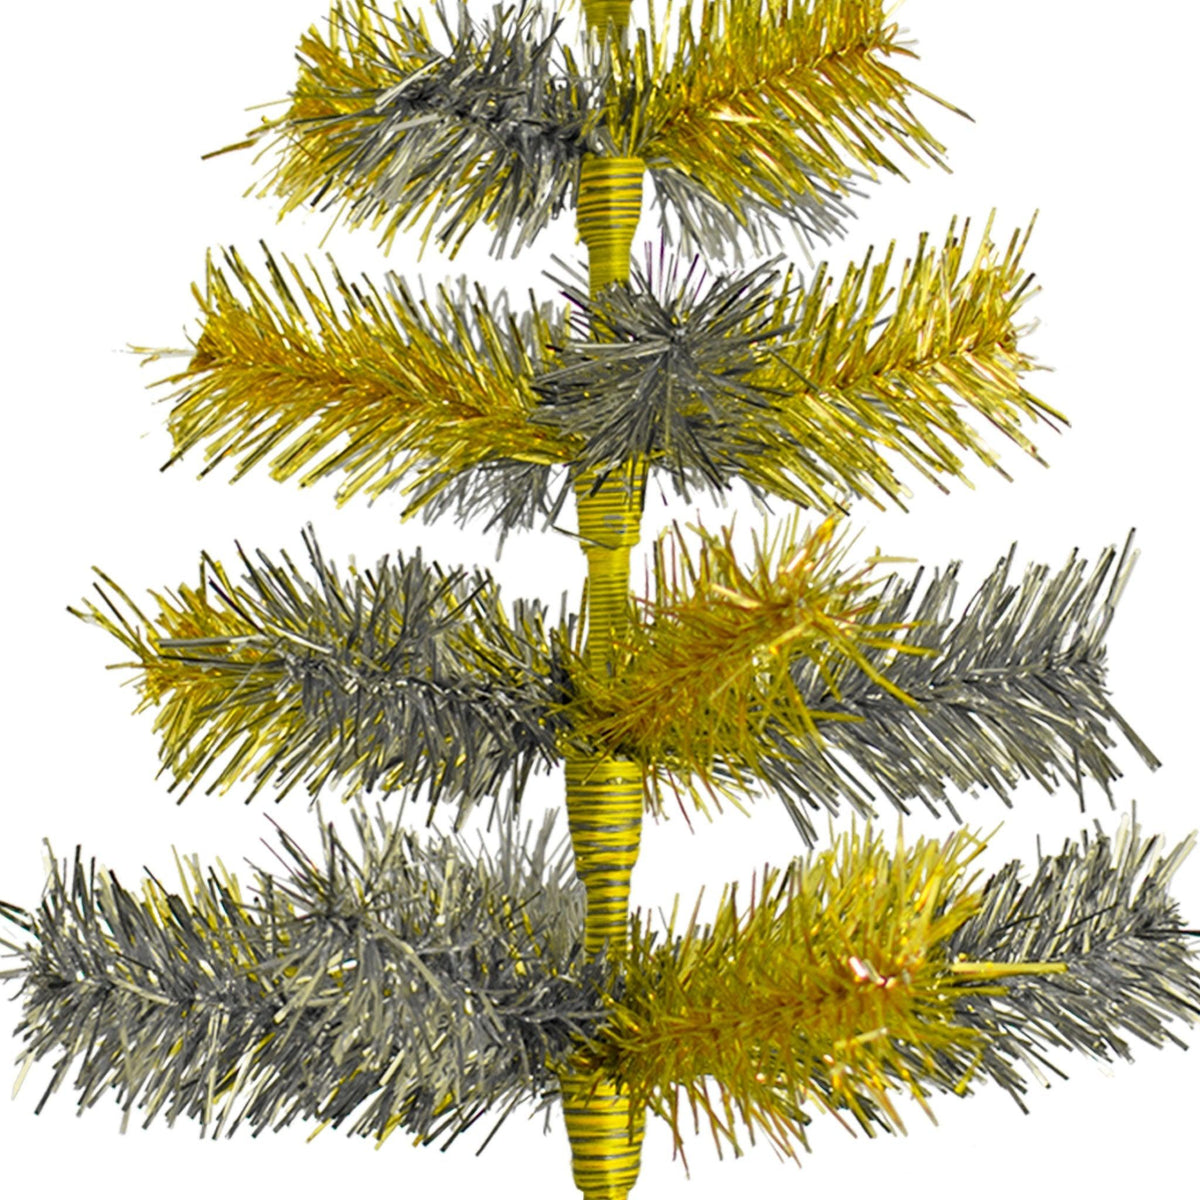 Gold and Silver Tinsel brush Christmas Trees have mix colors on each row of branches